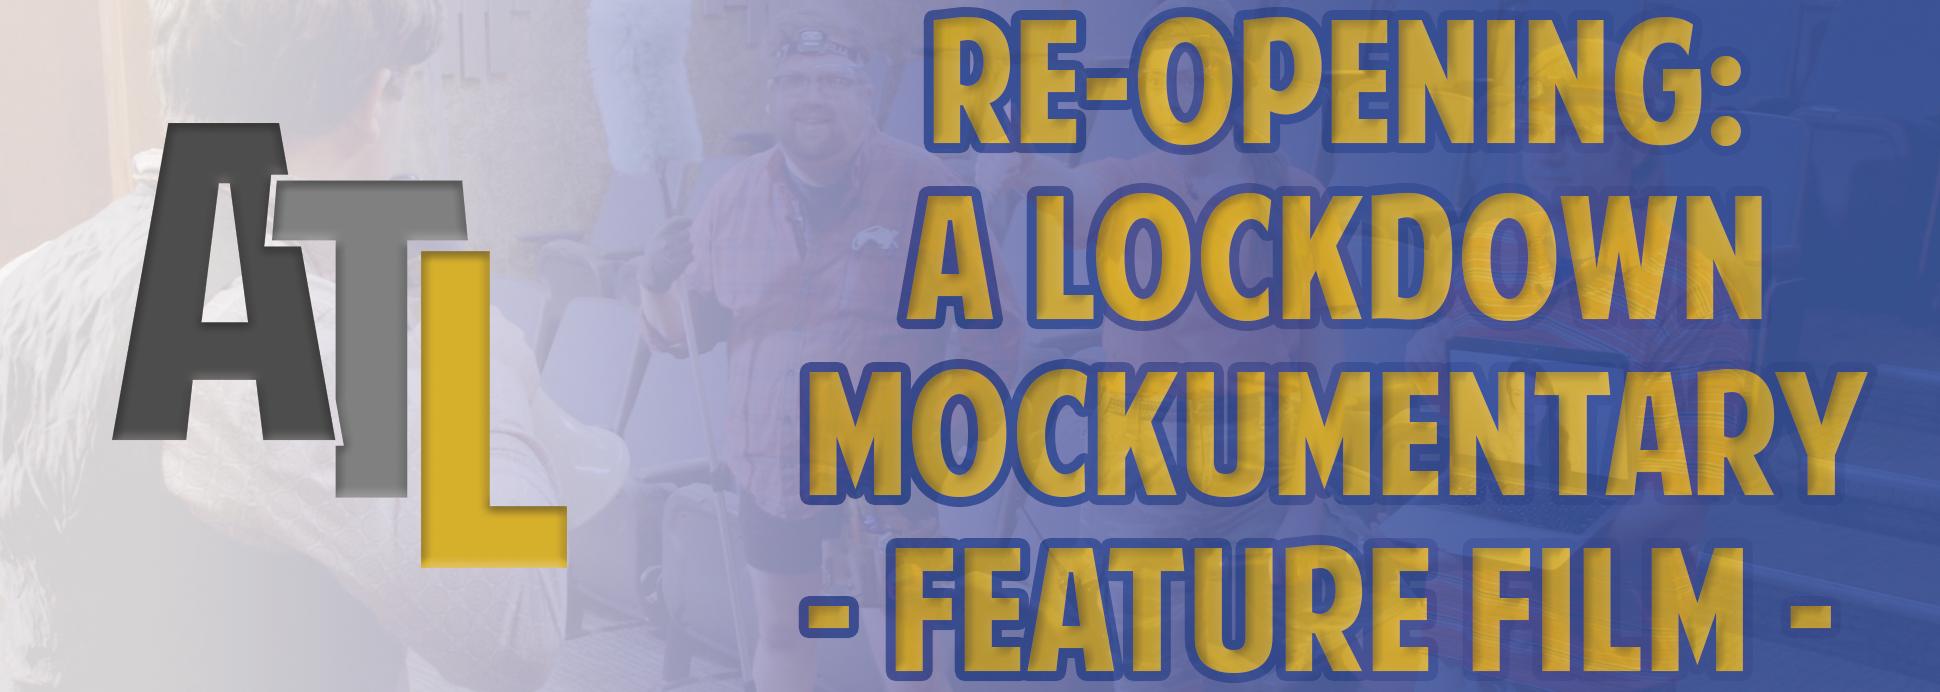 Feature Film - RE-OPENING: A Lockdown Mockumentary